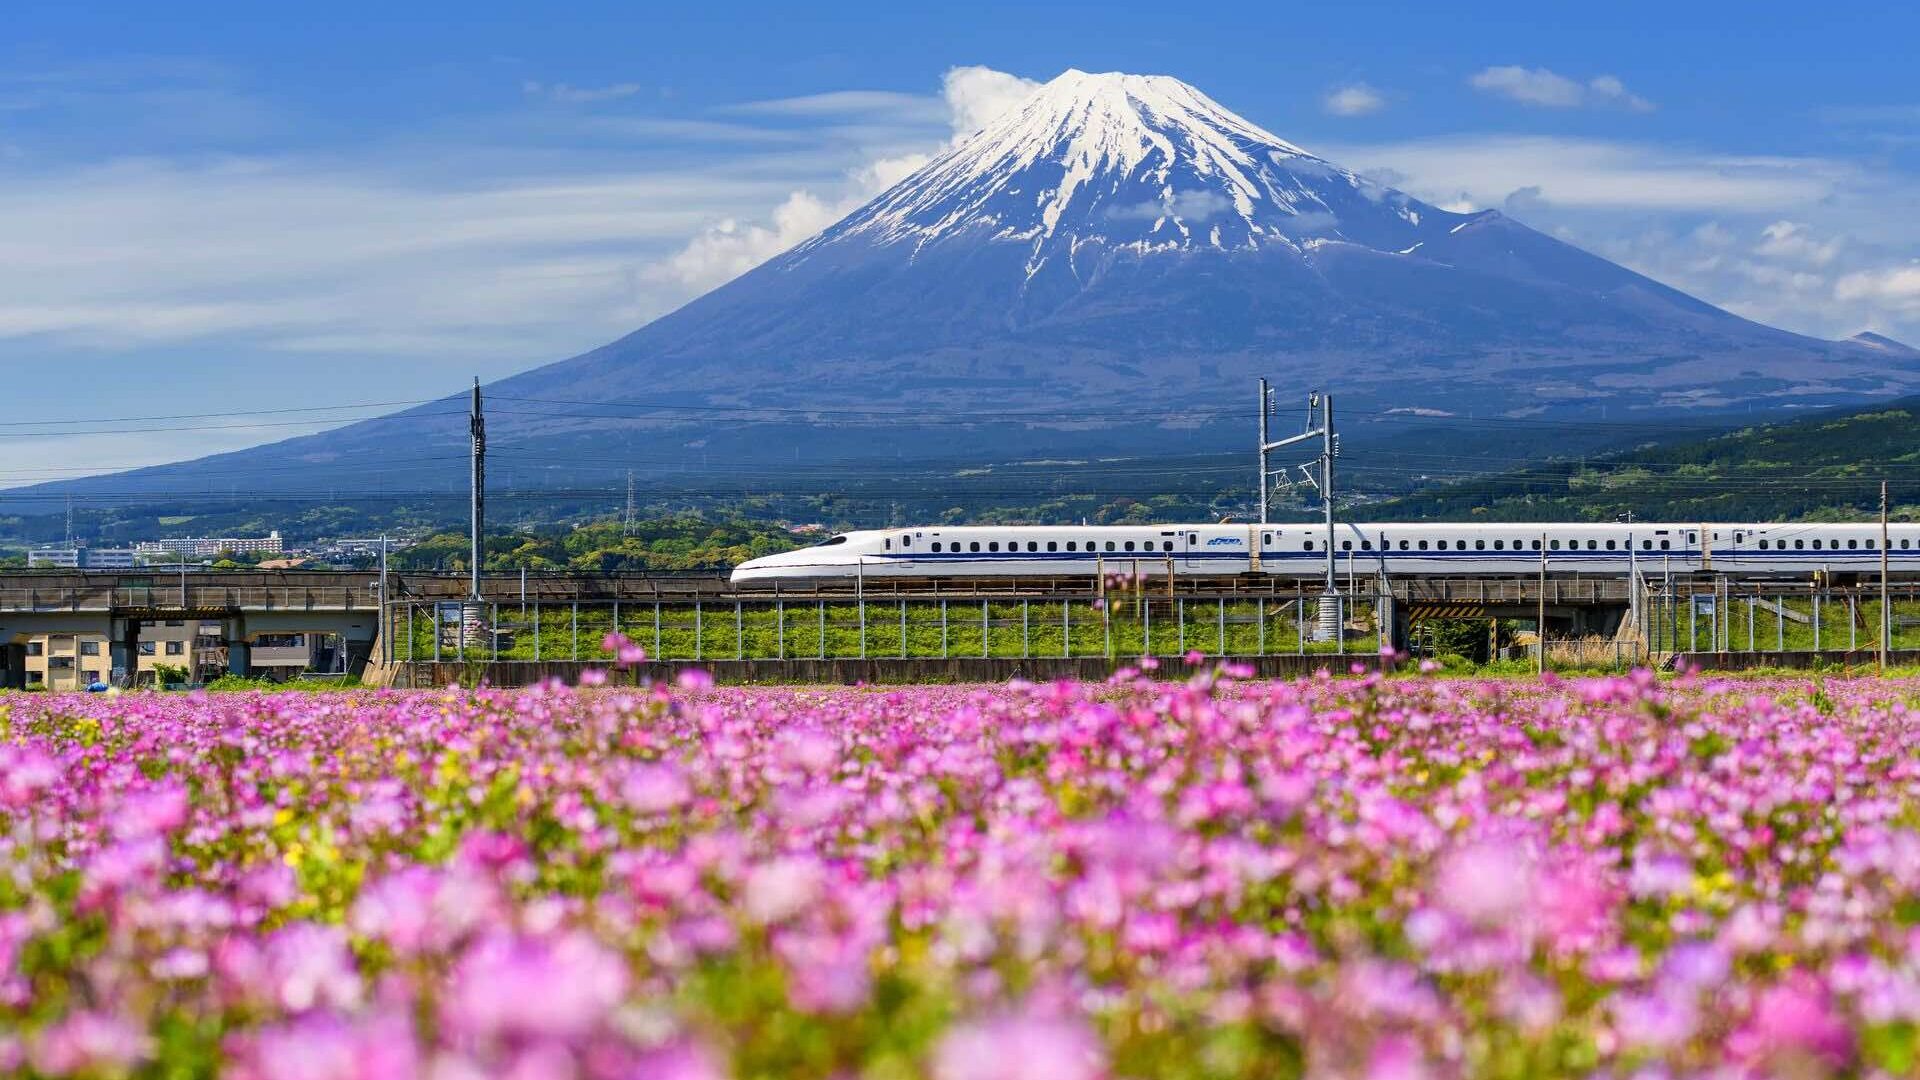 Shinkansen bullet train in foreground with cherry blossoms with Mount Fuji in background, Japan